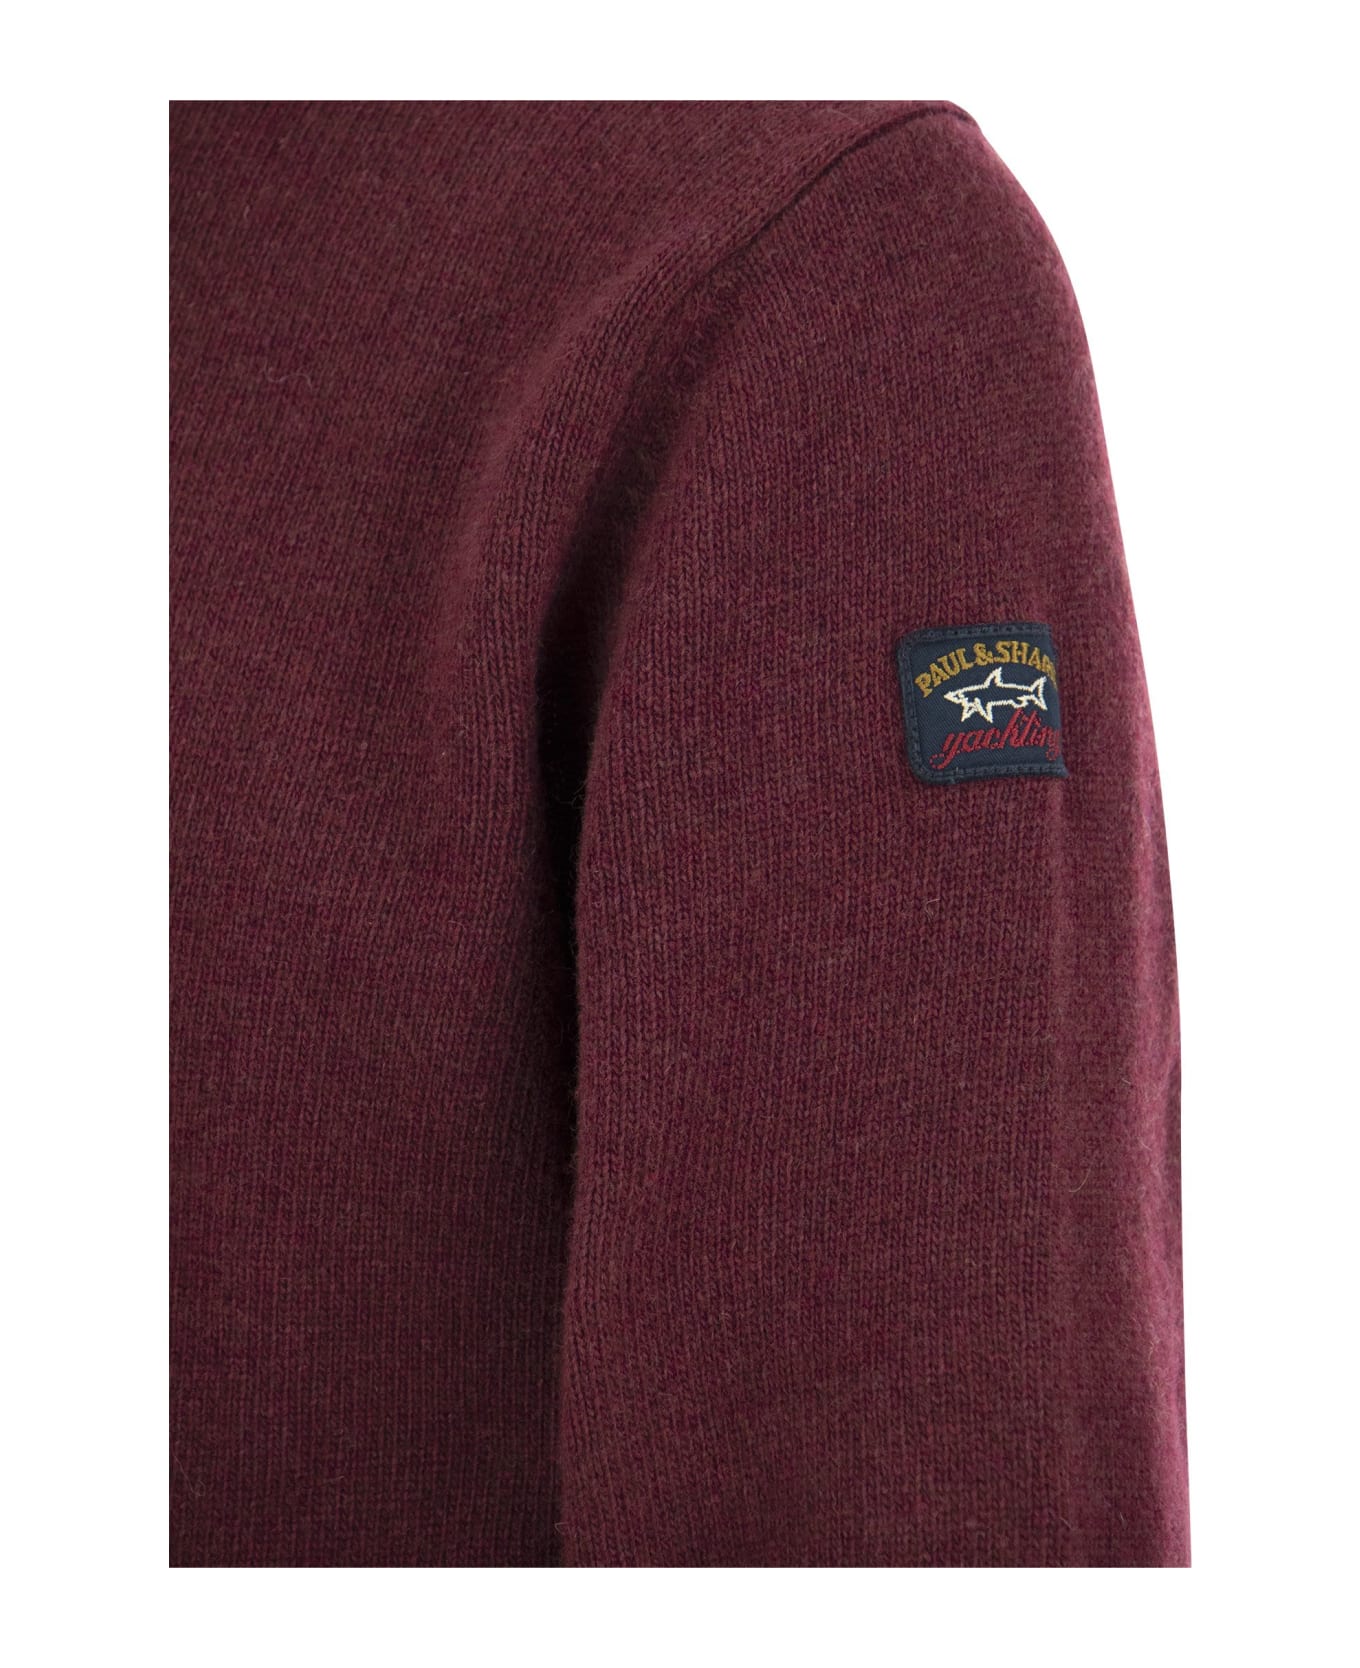 Paul&Shark Wool Crew Neck With Arm Patch Sweater - BORDEAUX ニットウェア